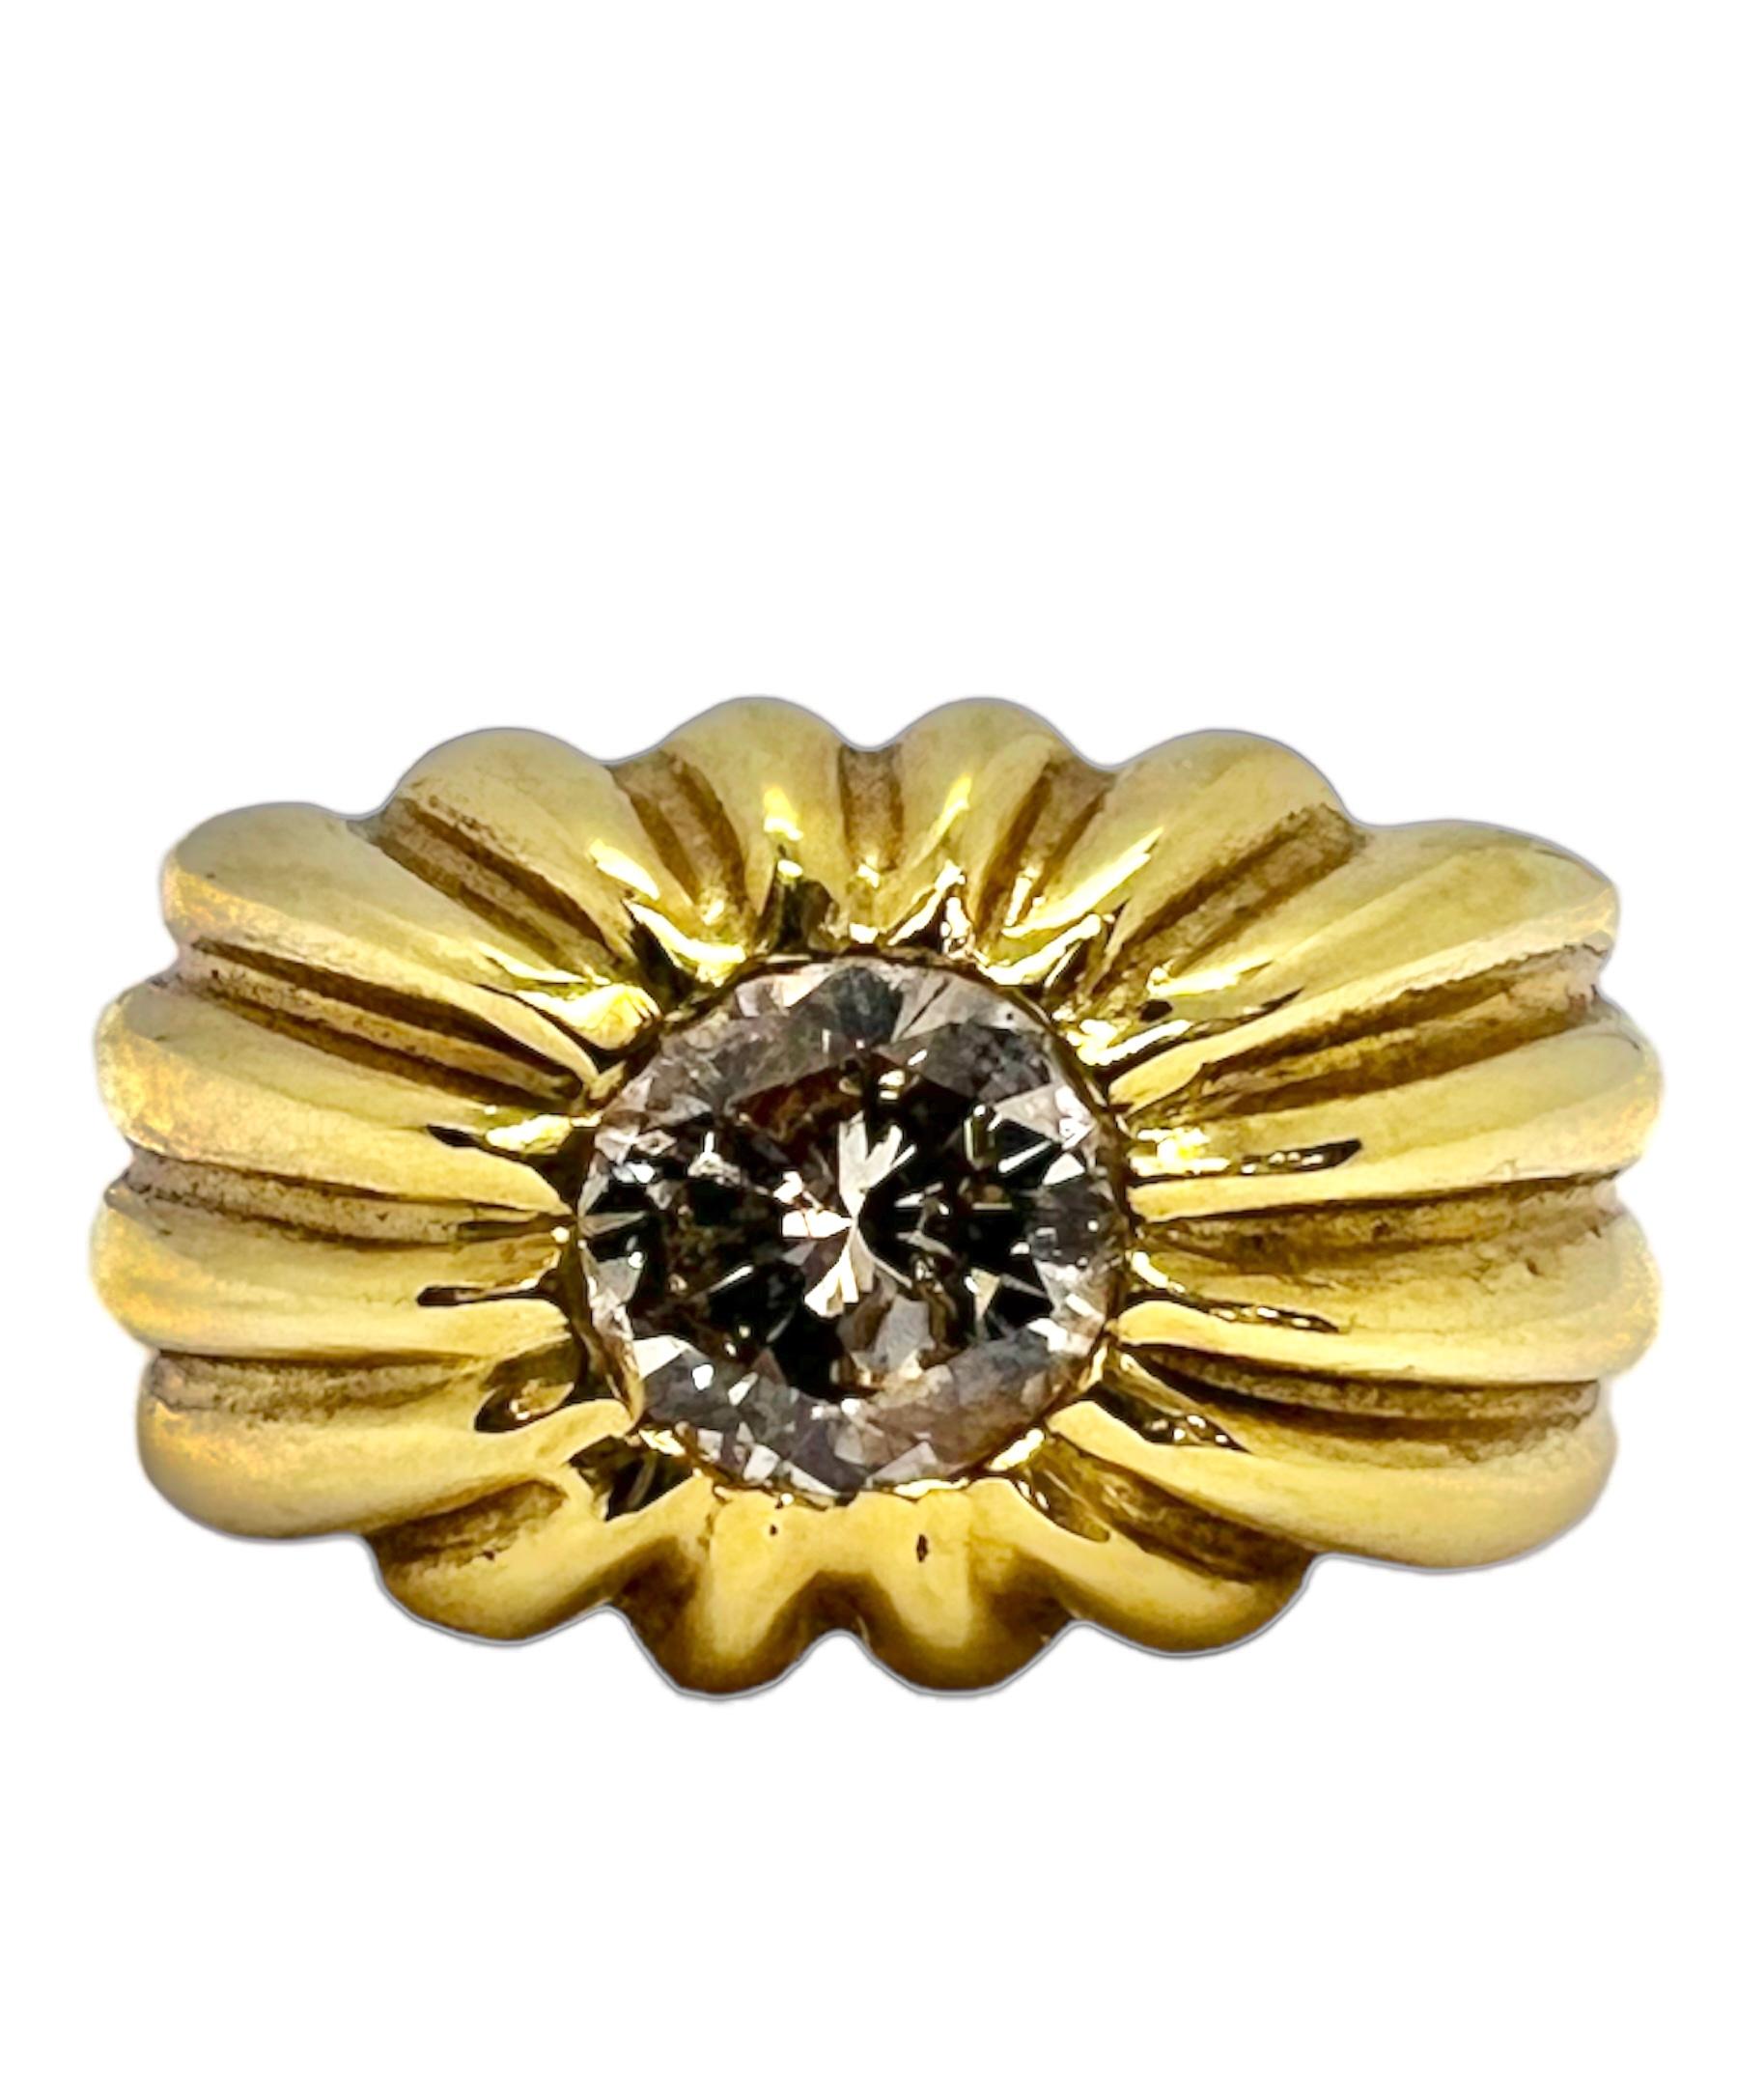 18K yellow gold ring with round center diamond.

Sophia D by Joseph Dardashti LTD has been known worldwide for 35 years and are inspired by classic Art Deco design that merges with modern manufacturing techniques. 